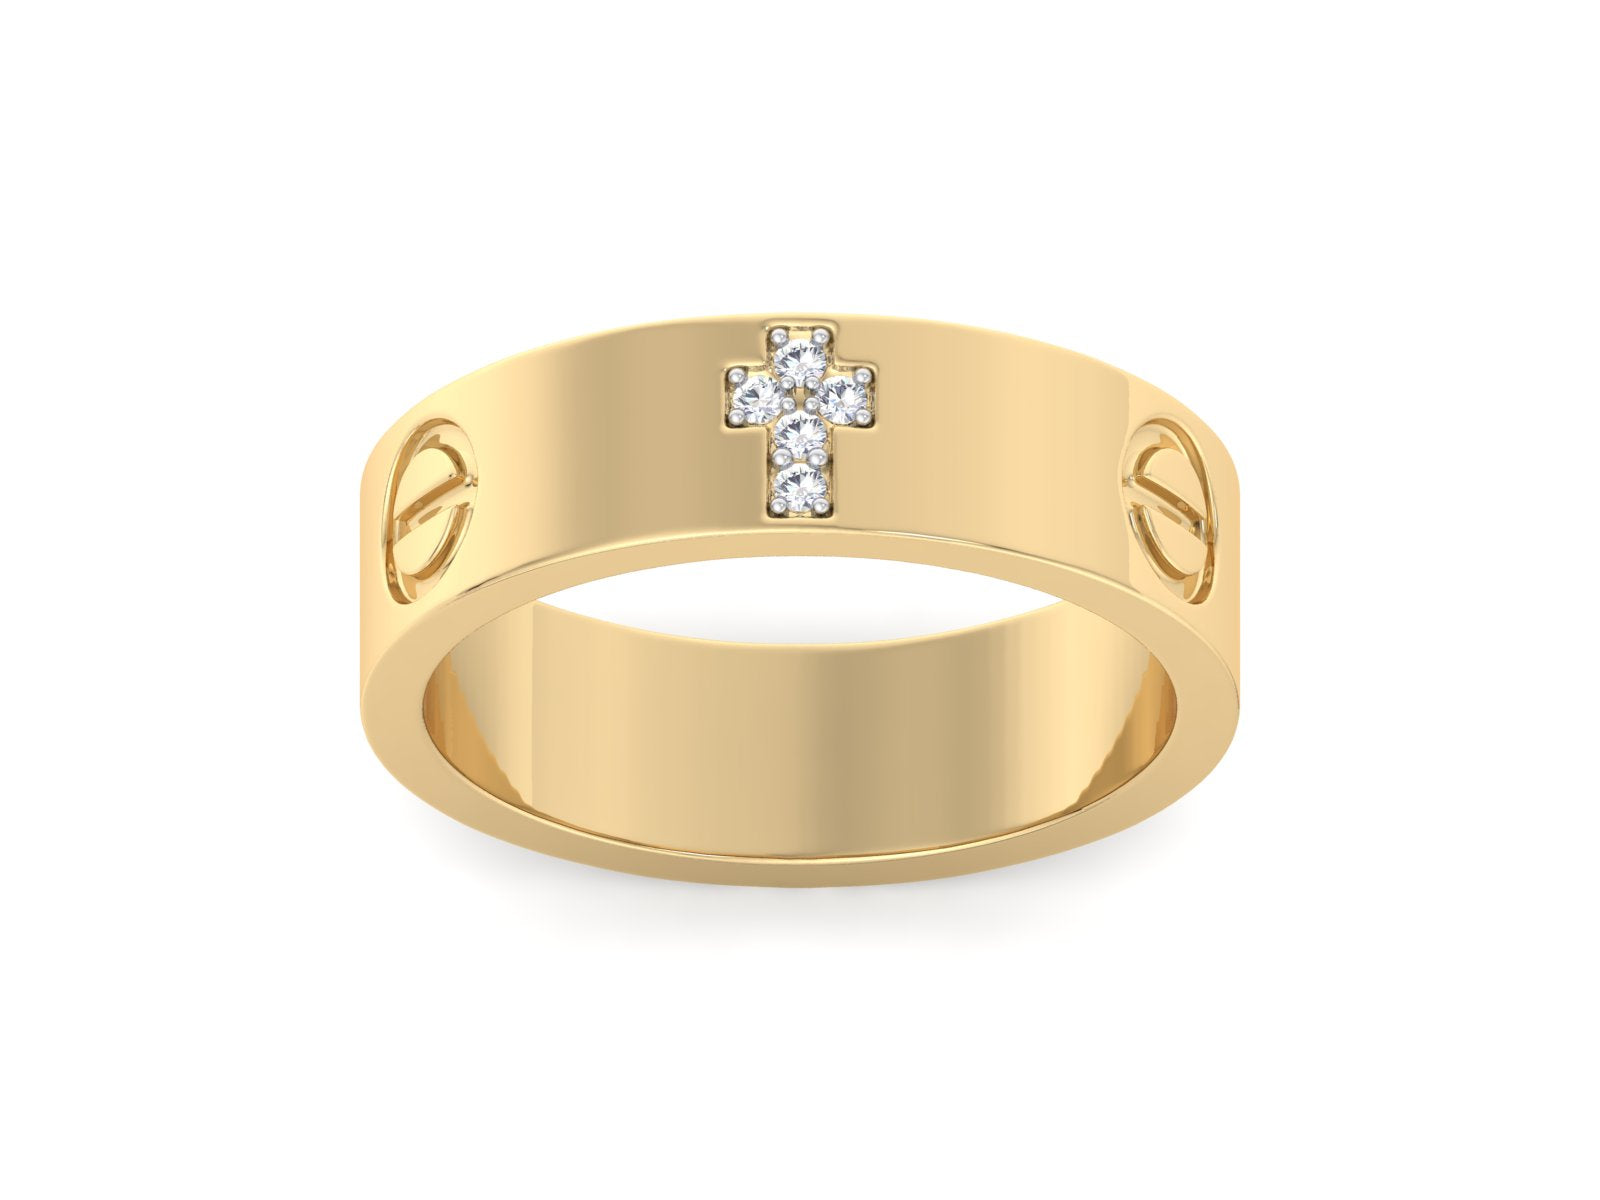 Cross band ring / 14K Solid Gold Love Wedding Band Ring/ Gift For Her